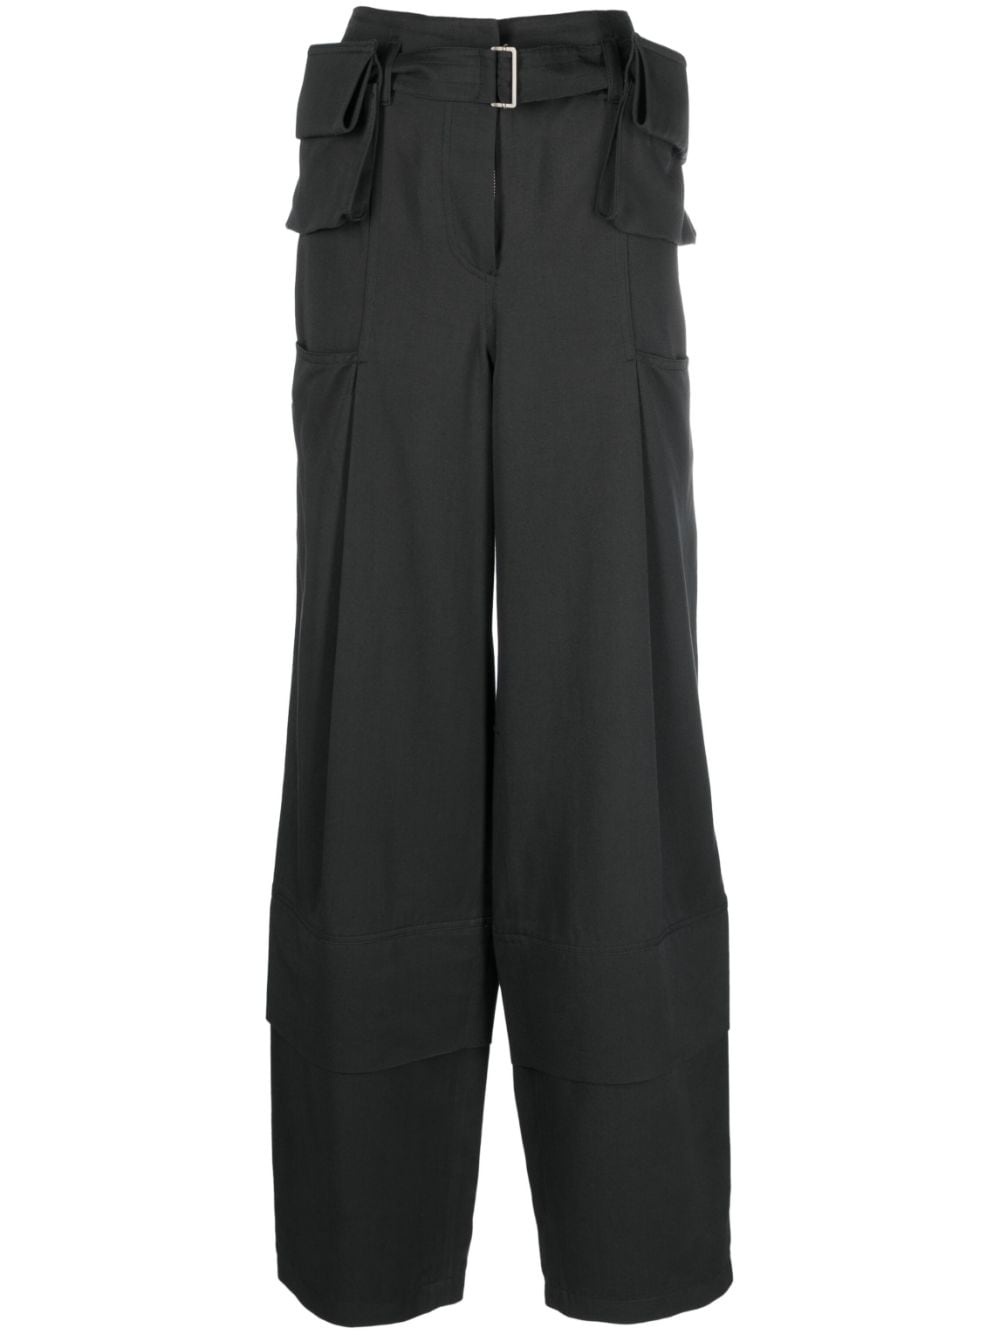 double-belted pocket trousers - 1